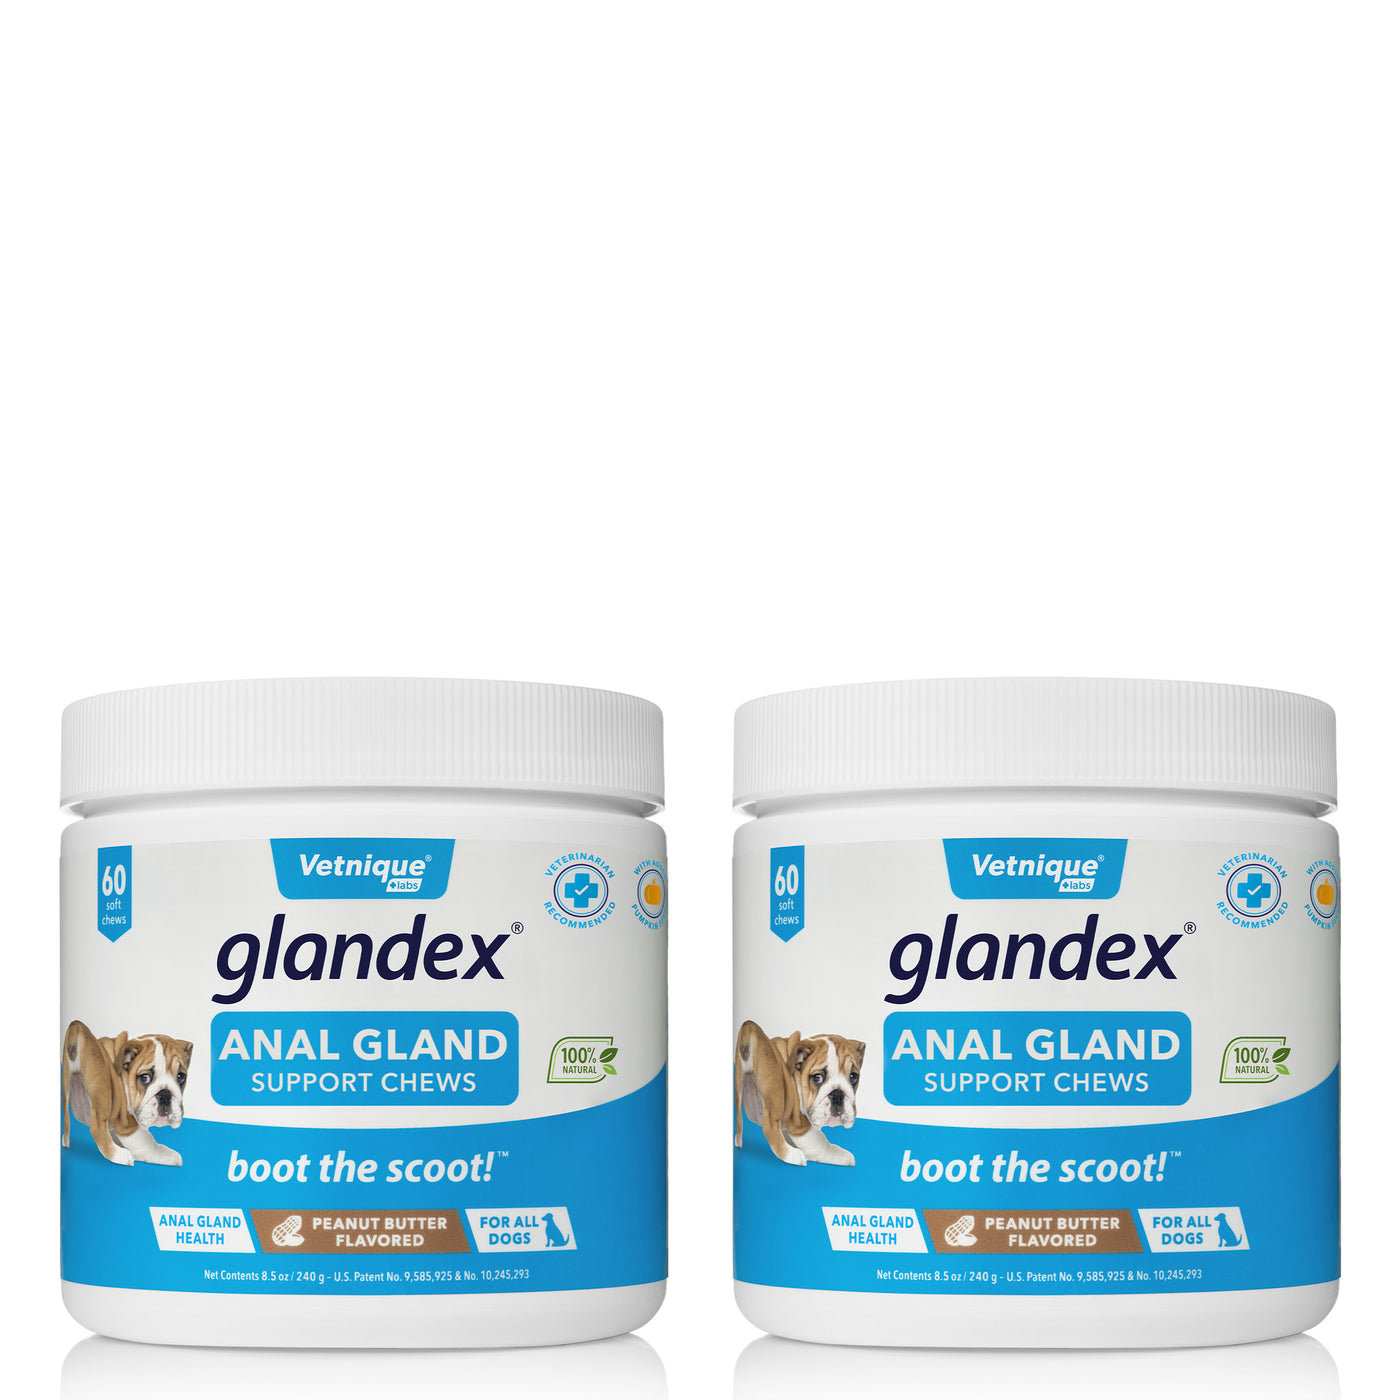 2 Pack Peanut Butter Flavored Glandex Anal Gland Support Chews